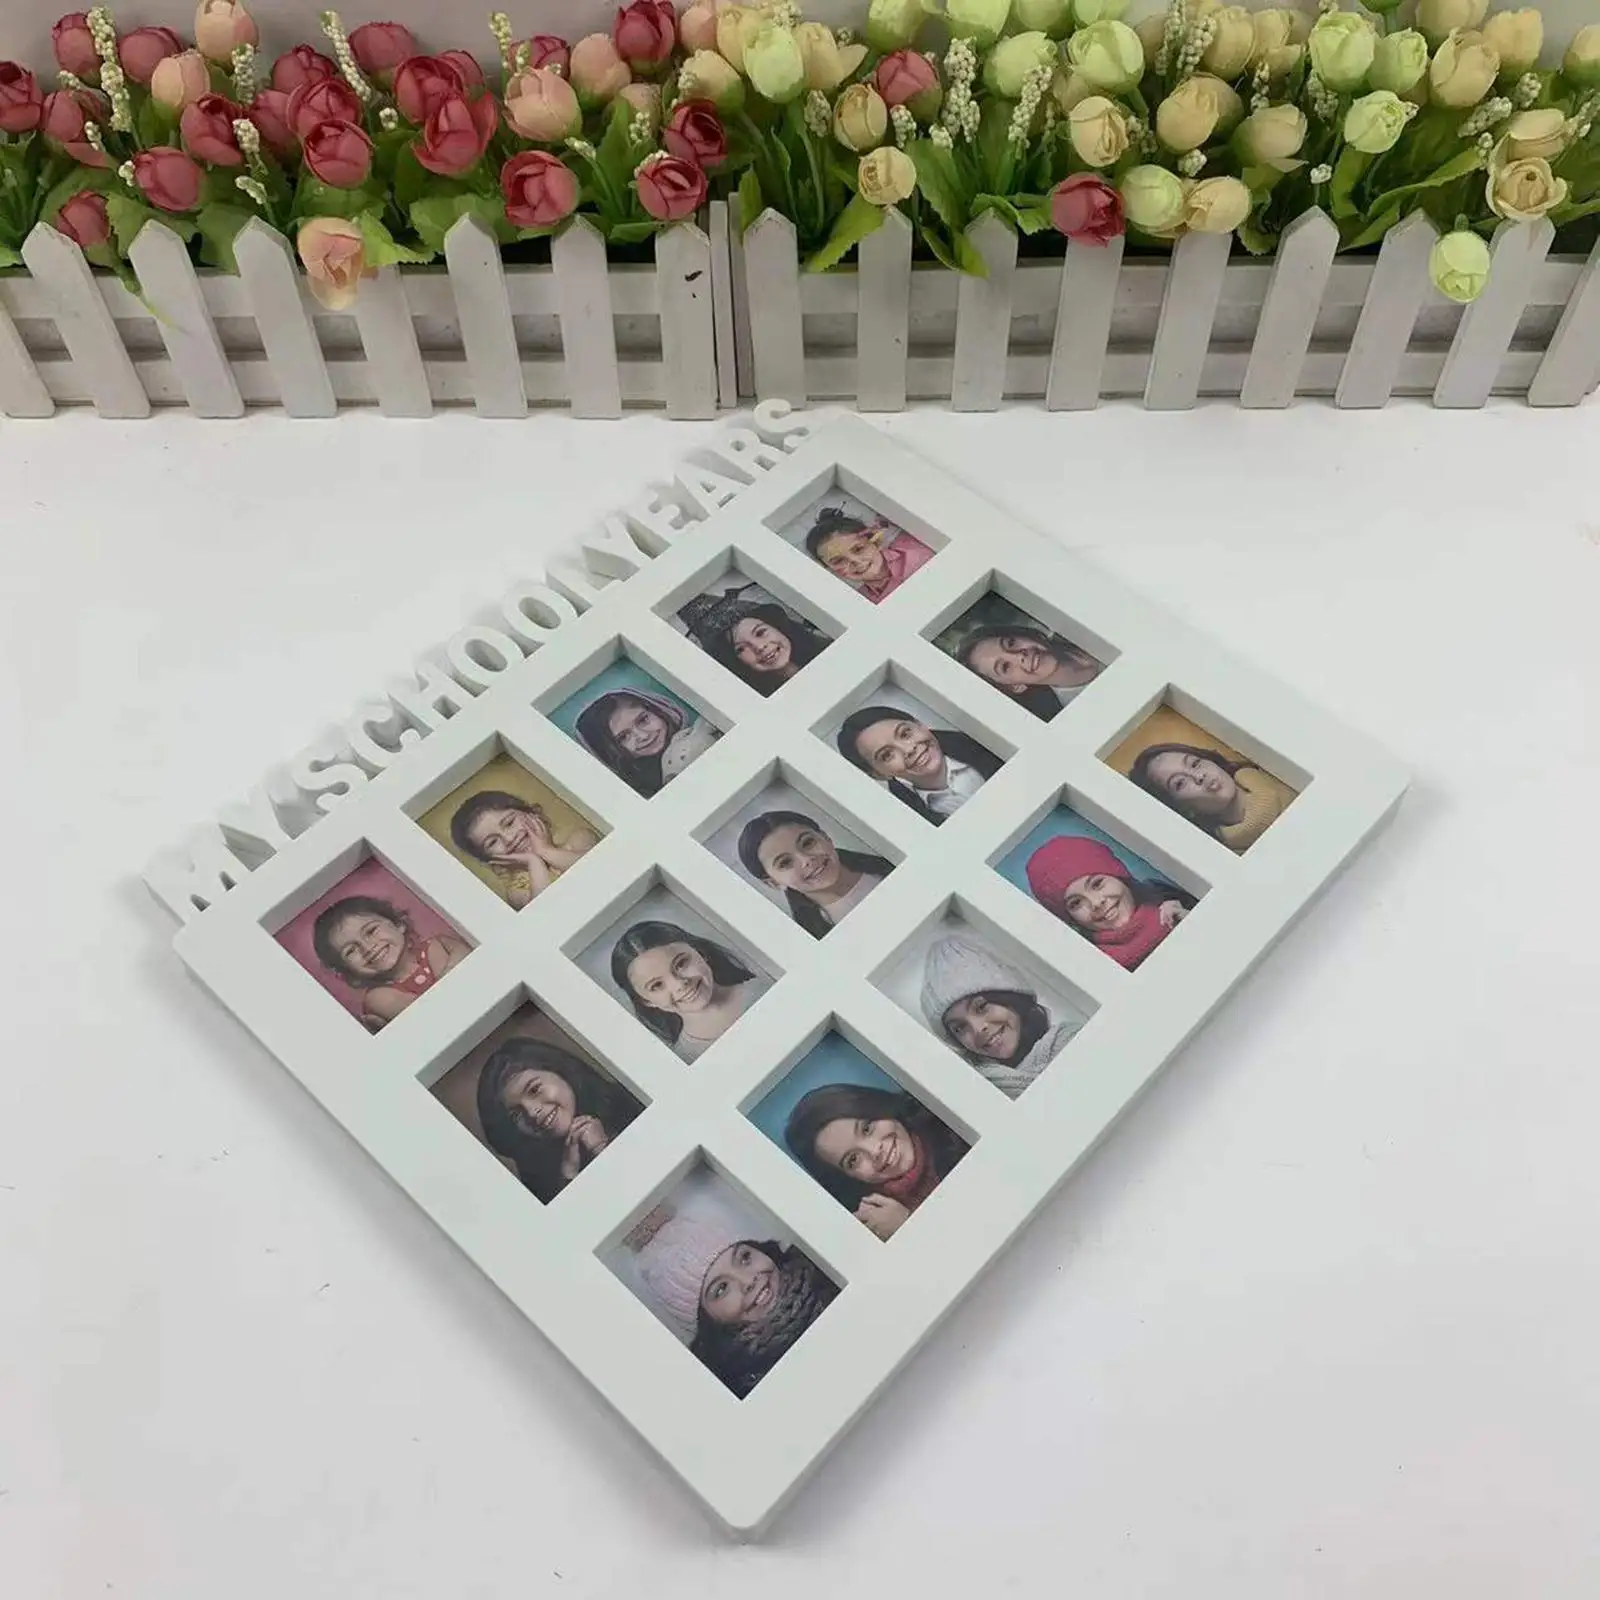 School Years Picture  Kids Picture  Kids Growing Memory Picture  Displays Picture  Graduation Party Decorations